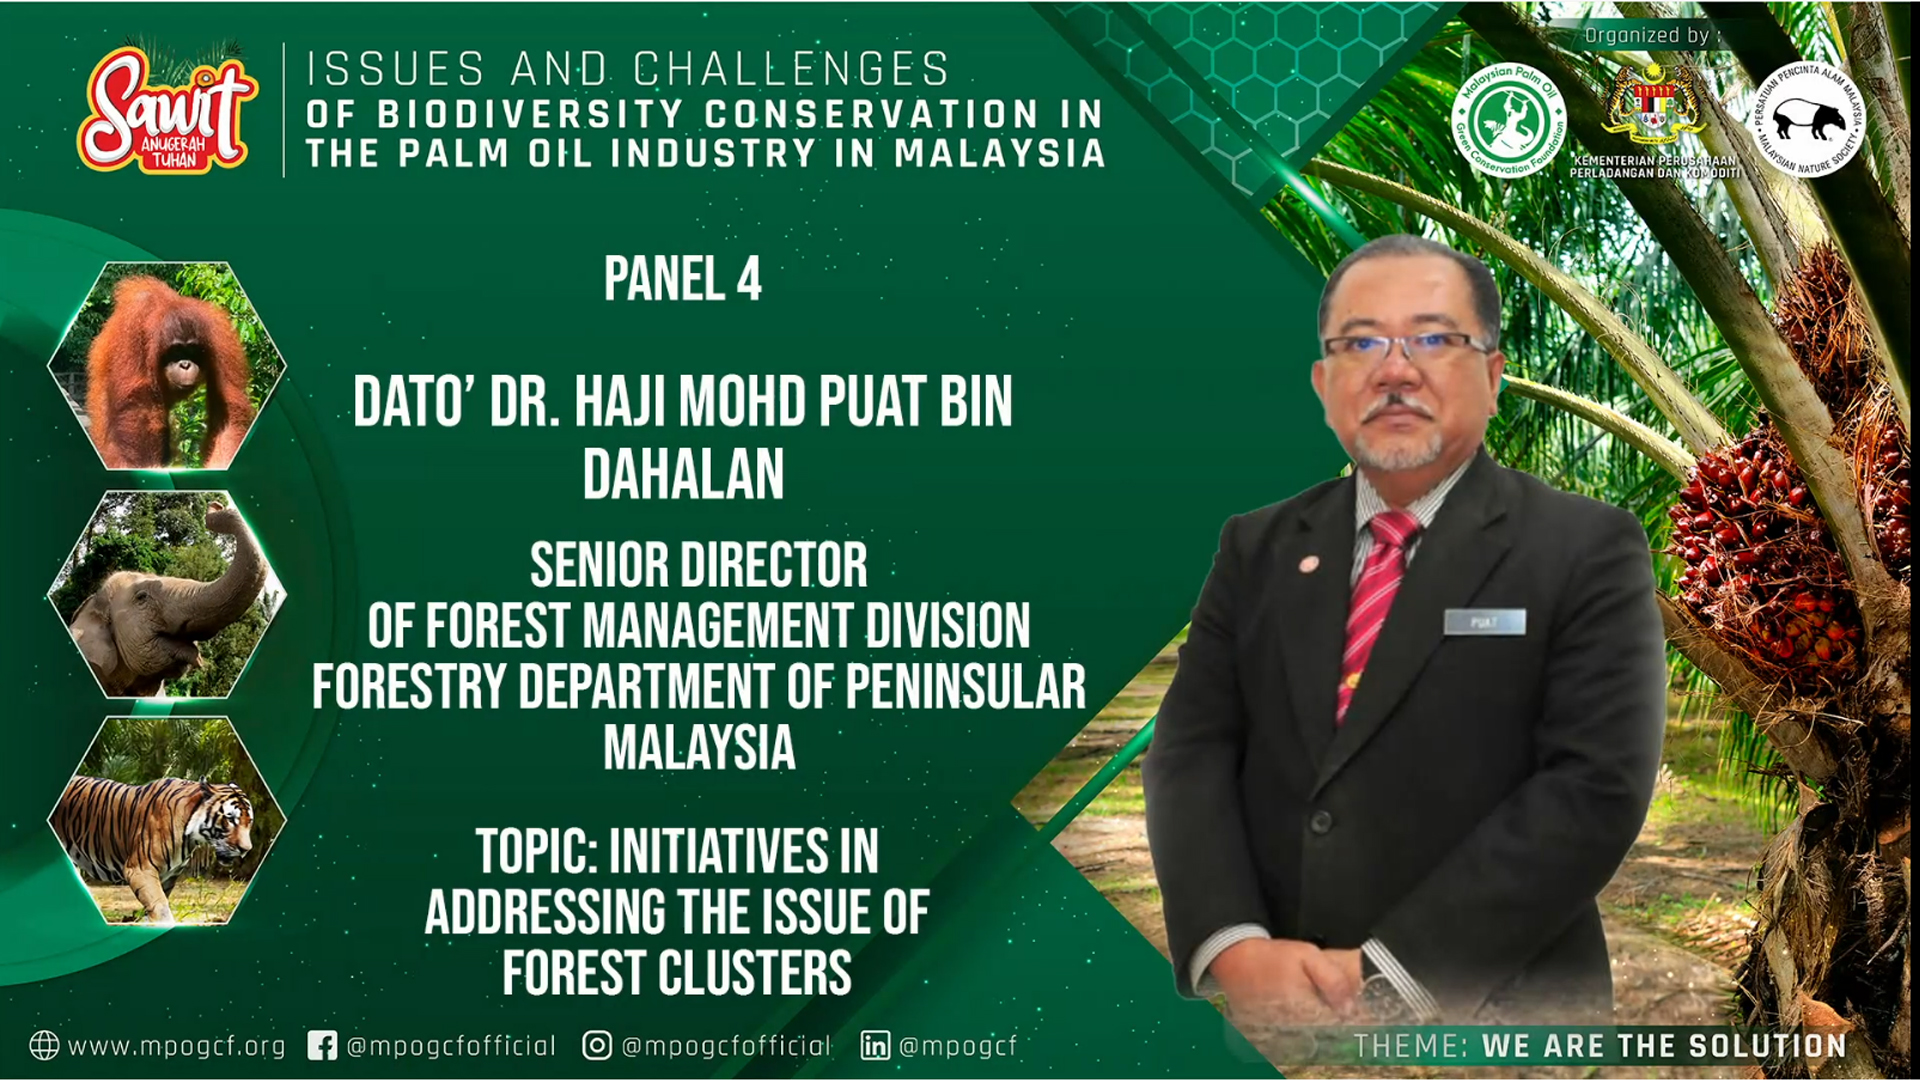 Inititatives in Addressing the Issue of Forest Clusters by Dato Dr Hj. Mohd Puat bin Dahalan